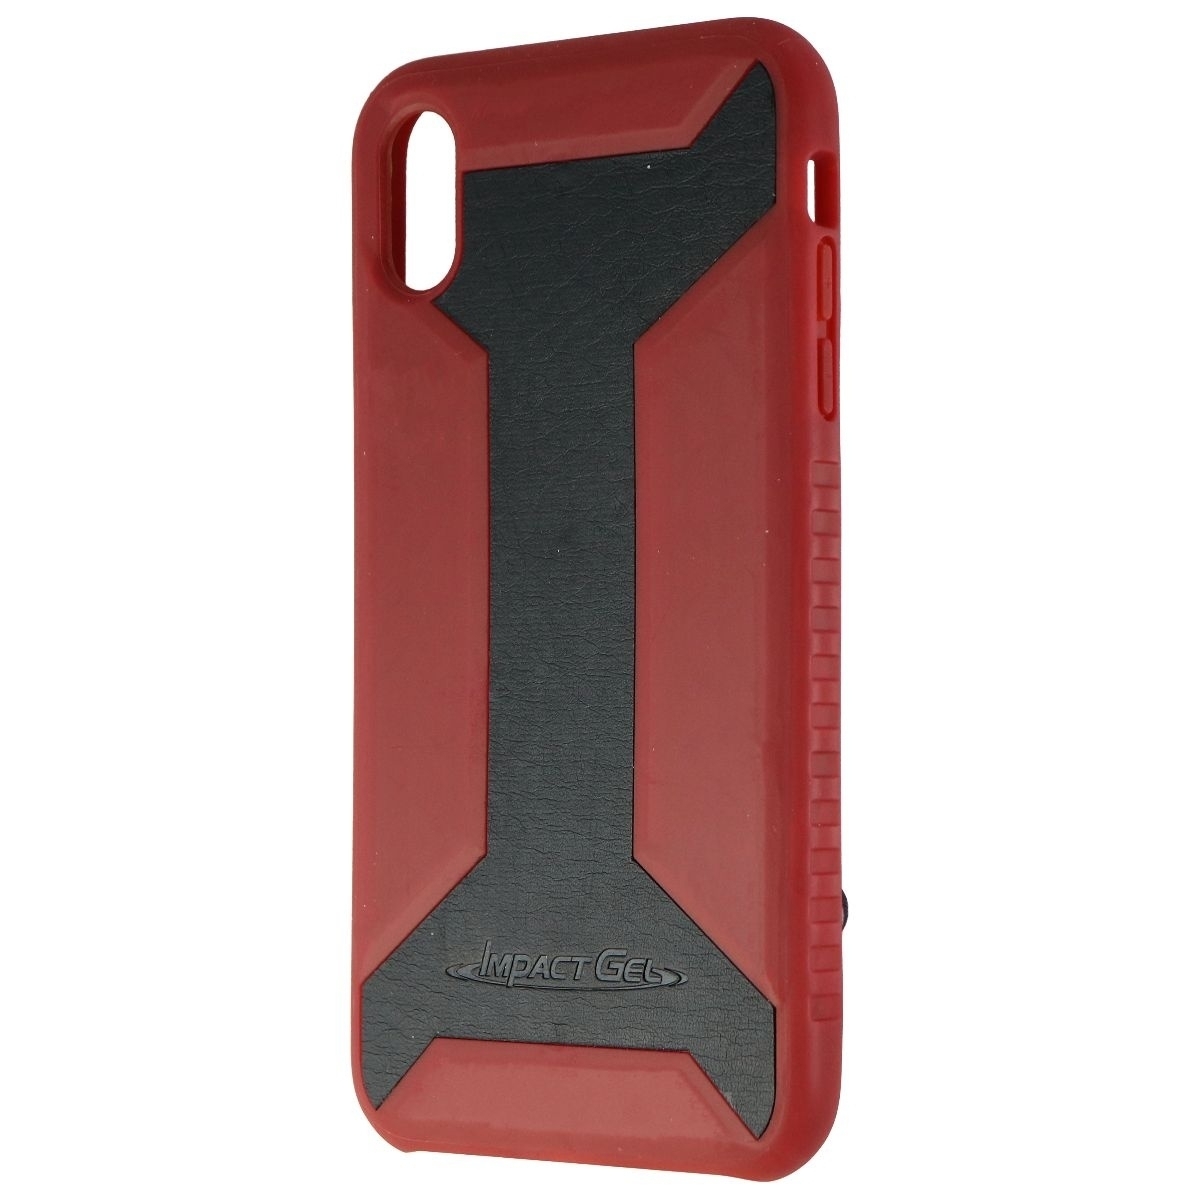 Impact Gel Warrior Series Case For Apple IPhone XS Max - Red & Black